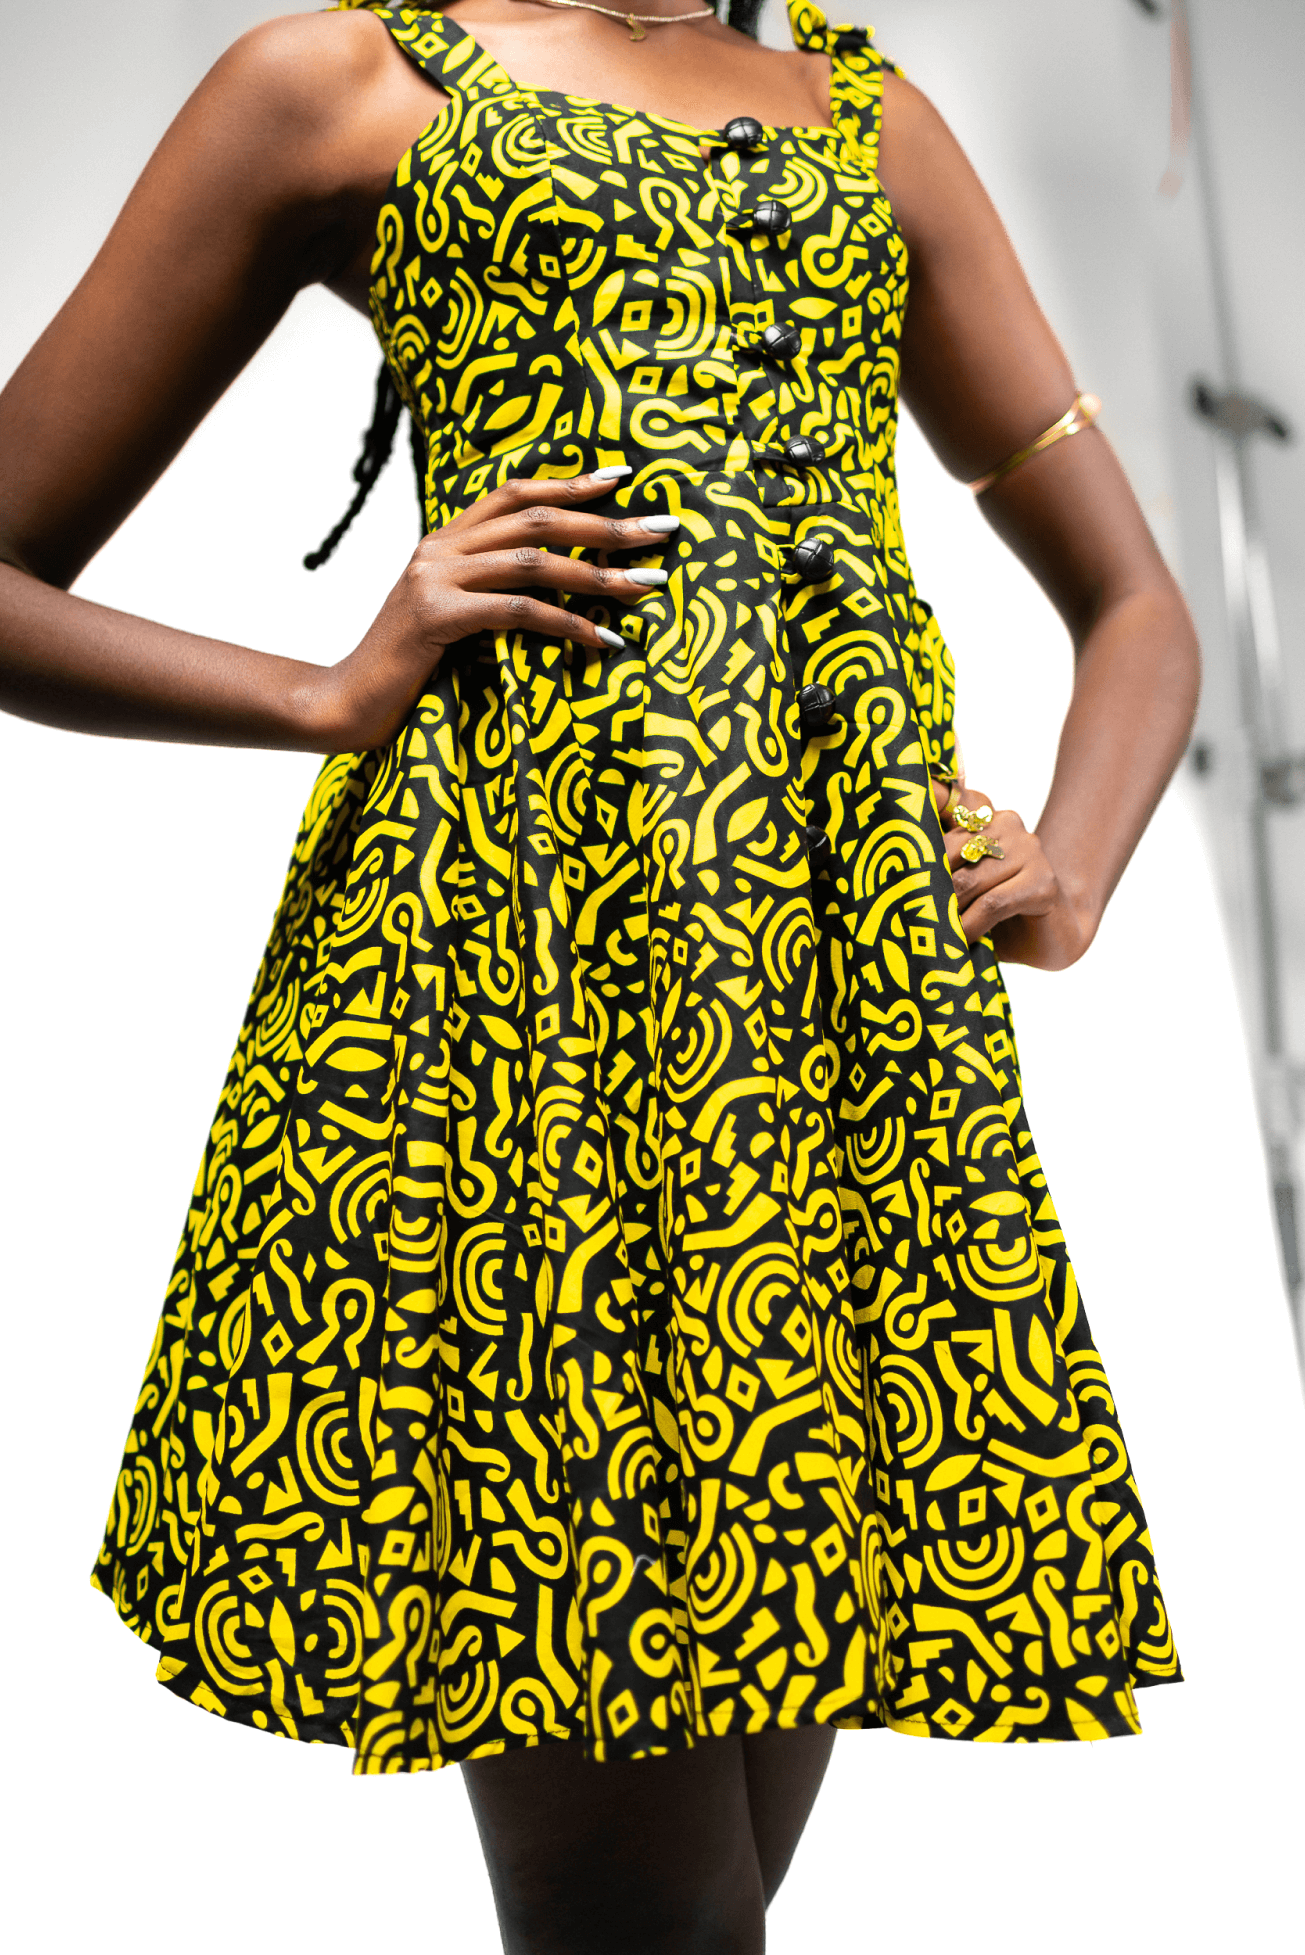 Shop Mimosa Printed Skater Dress by Cyami Custom Fit on Arrai. Discover stylish, affordable clothing, jewelry, handbags and unique handmade pieces from top Kenyan & African fashion brands prioritising sustainability and quality craftsmanship.